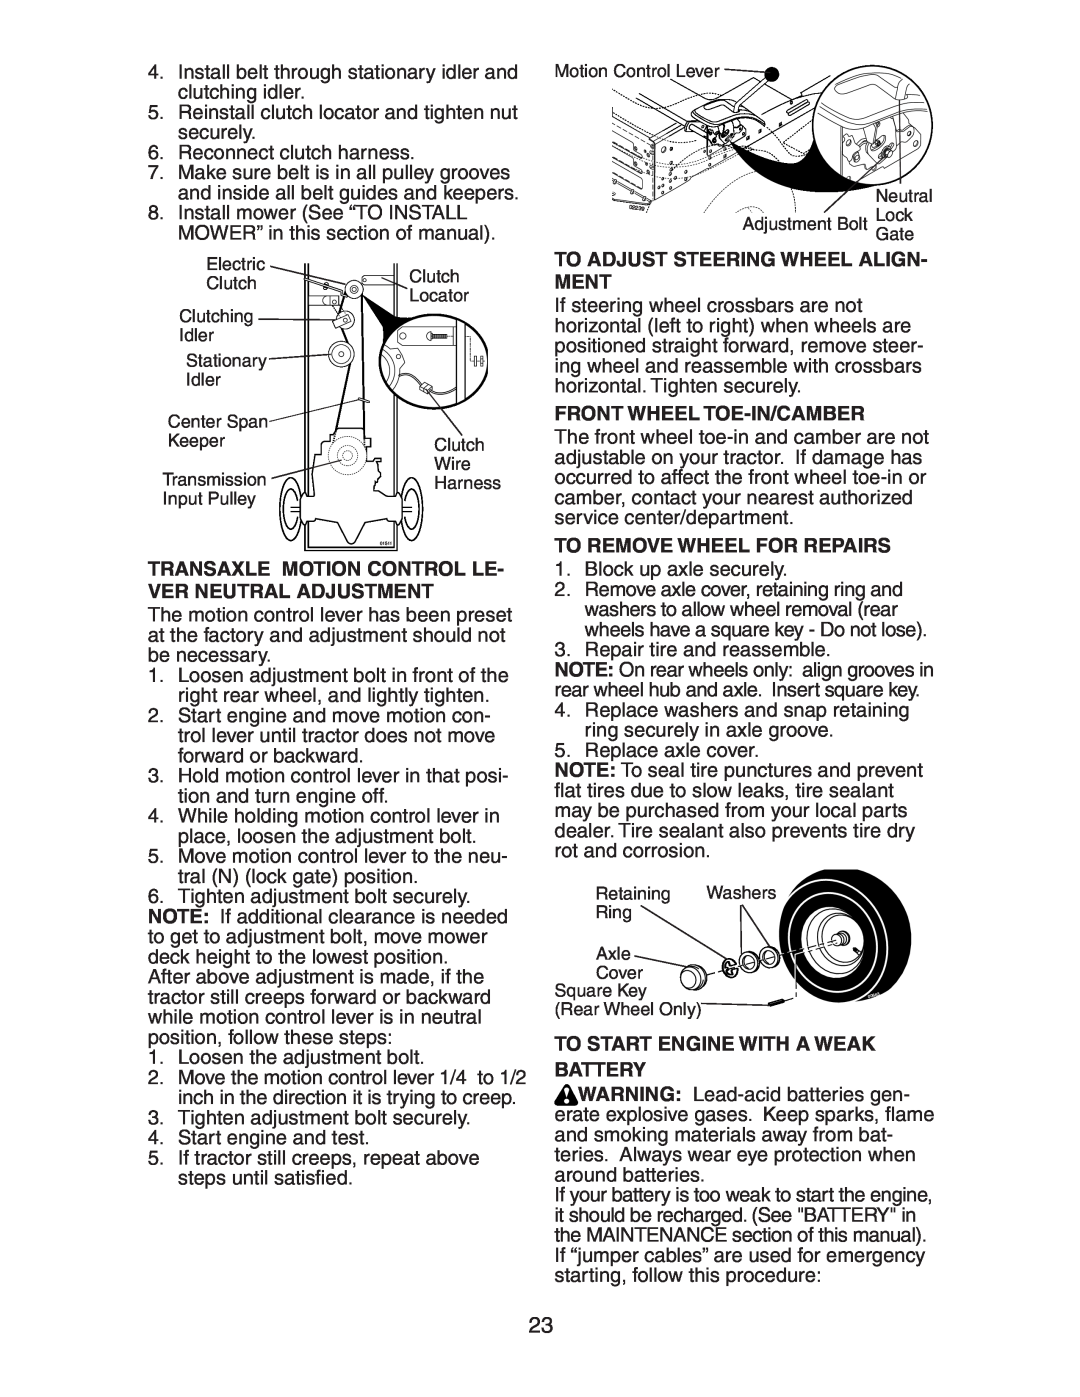 Poulan CO185H42STB manual To Adjust Steering Wheel Align- Ment, Front Wheel Toe-In/Camber, To Remove Wheel For Repairs 